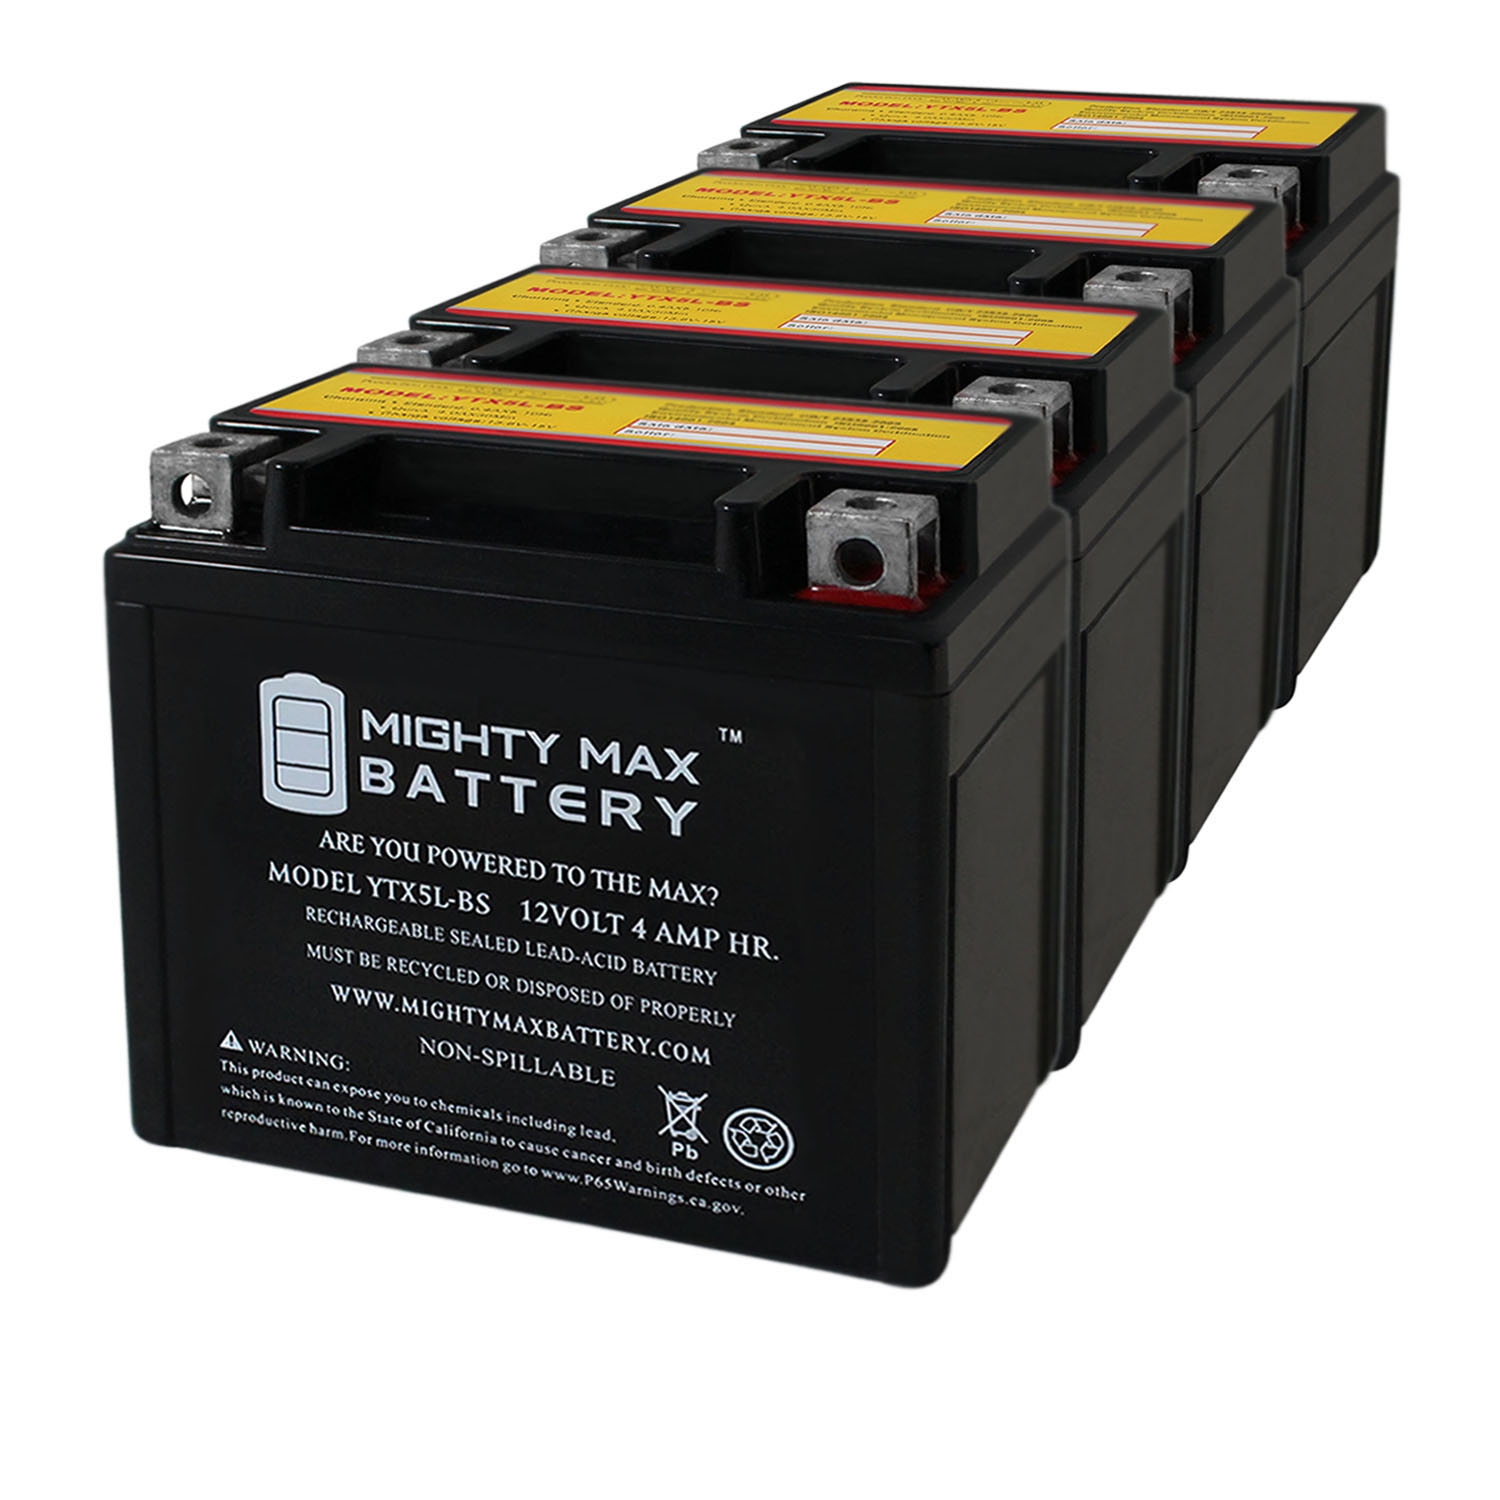 YTX5L-BS MOTORCYCLE BATTERY REPLACEMENT - 12V 4AH - 80 CCA - 4 PACK